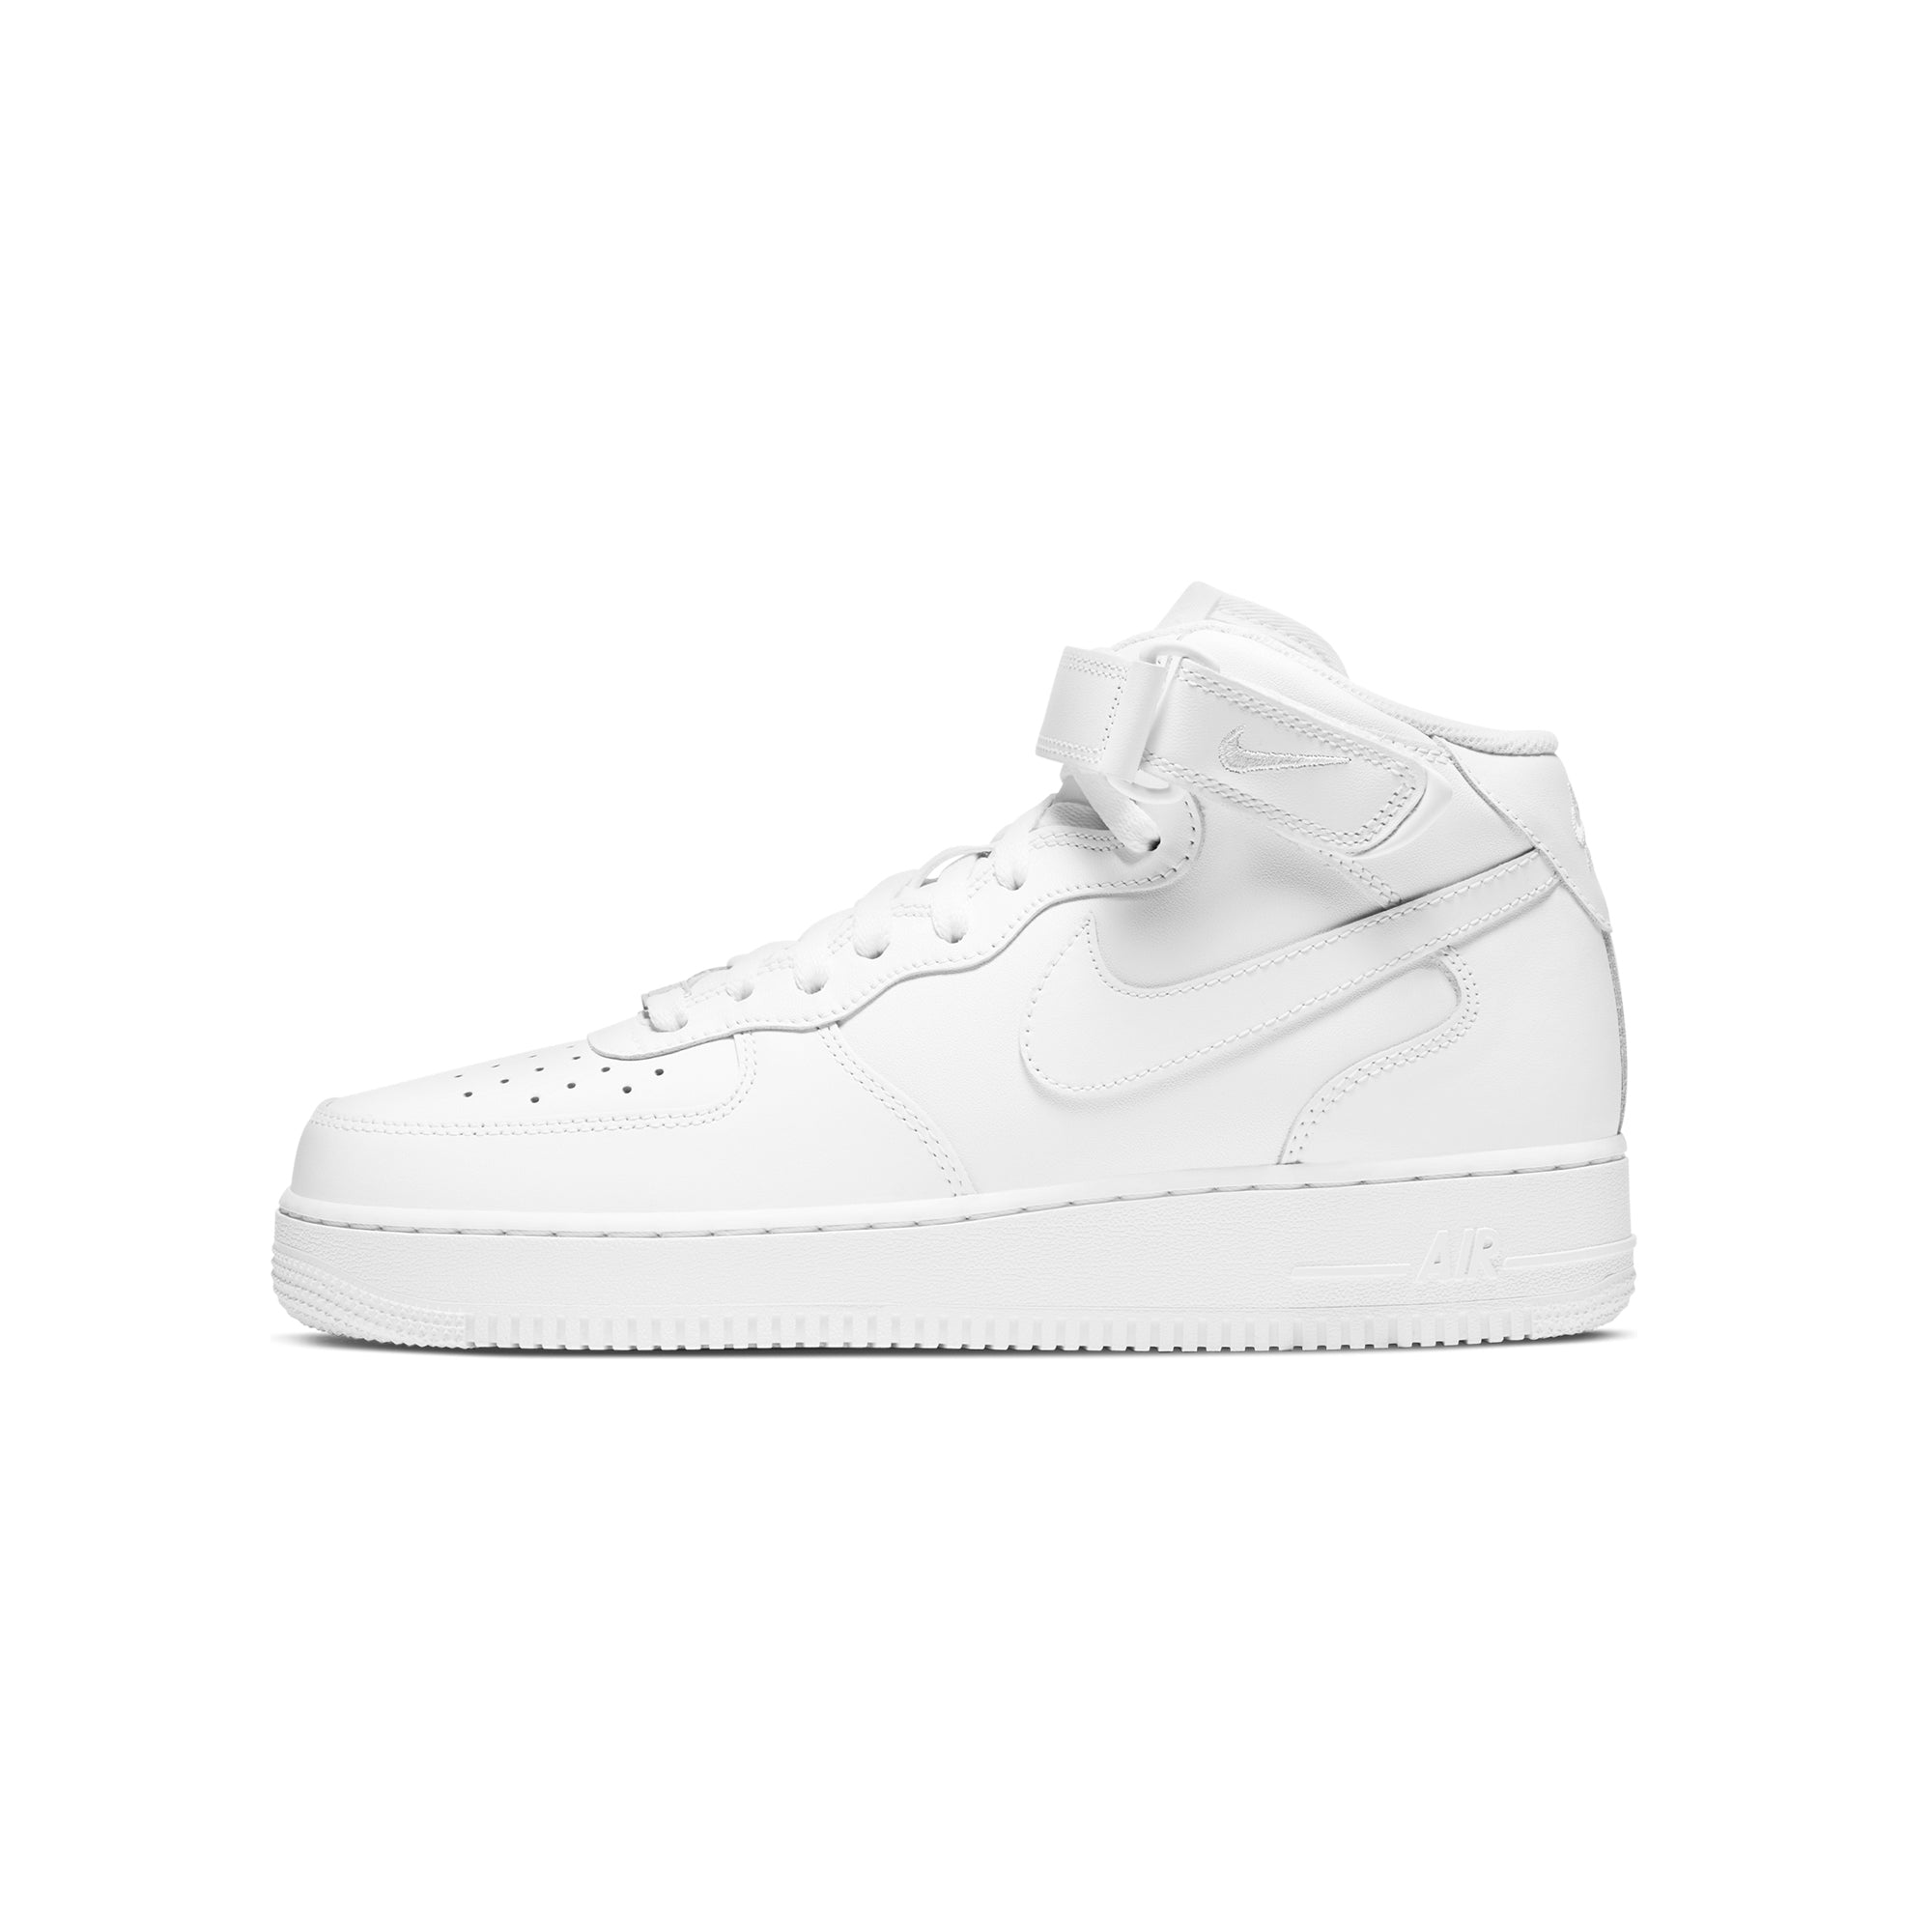 Nike Men's Air Force 1 '07 High Shoes